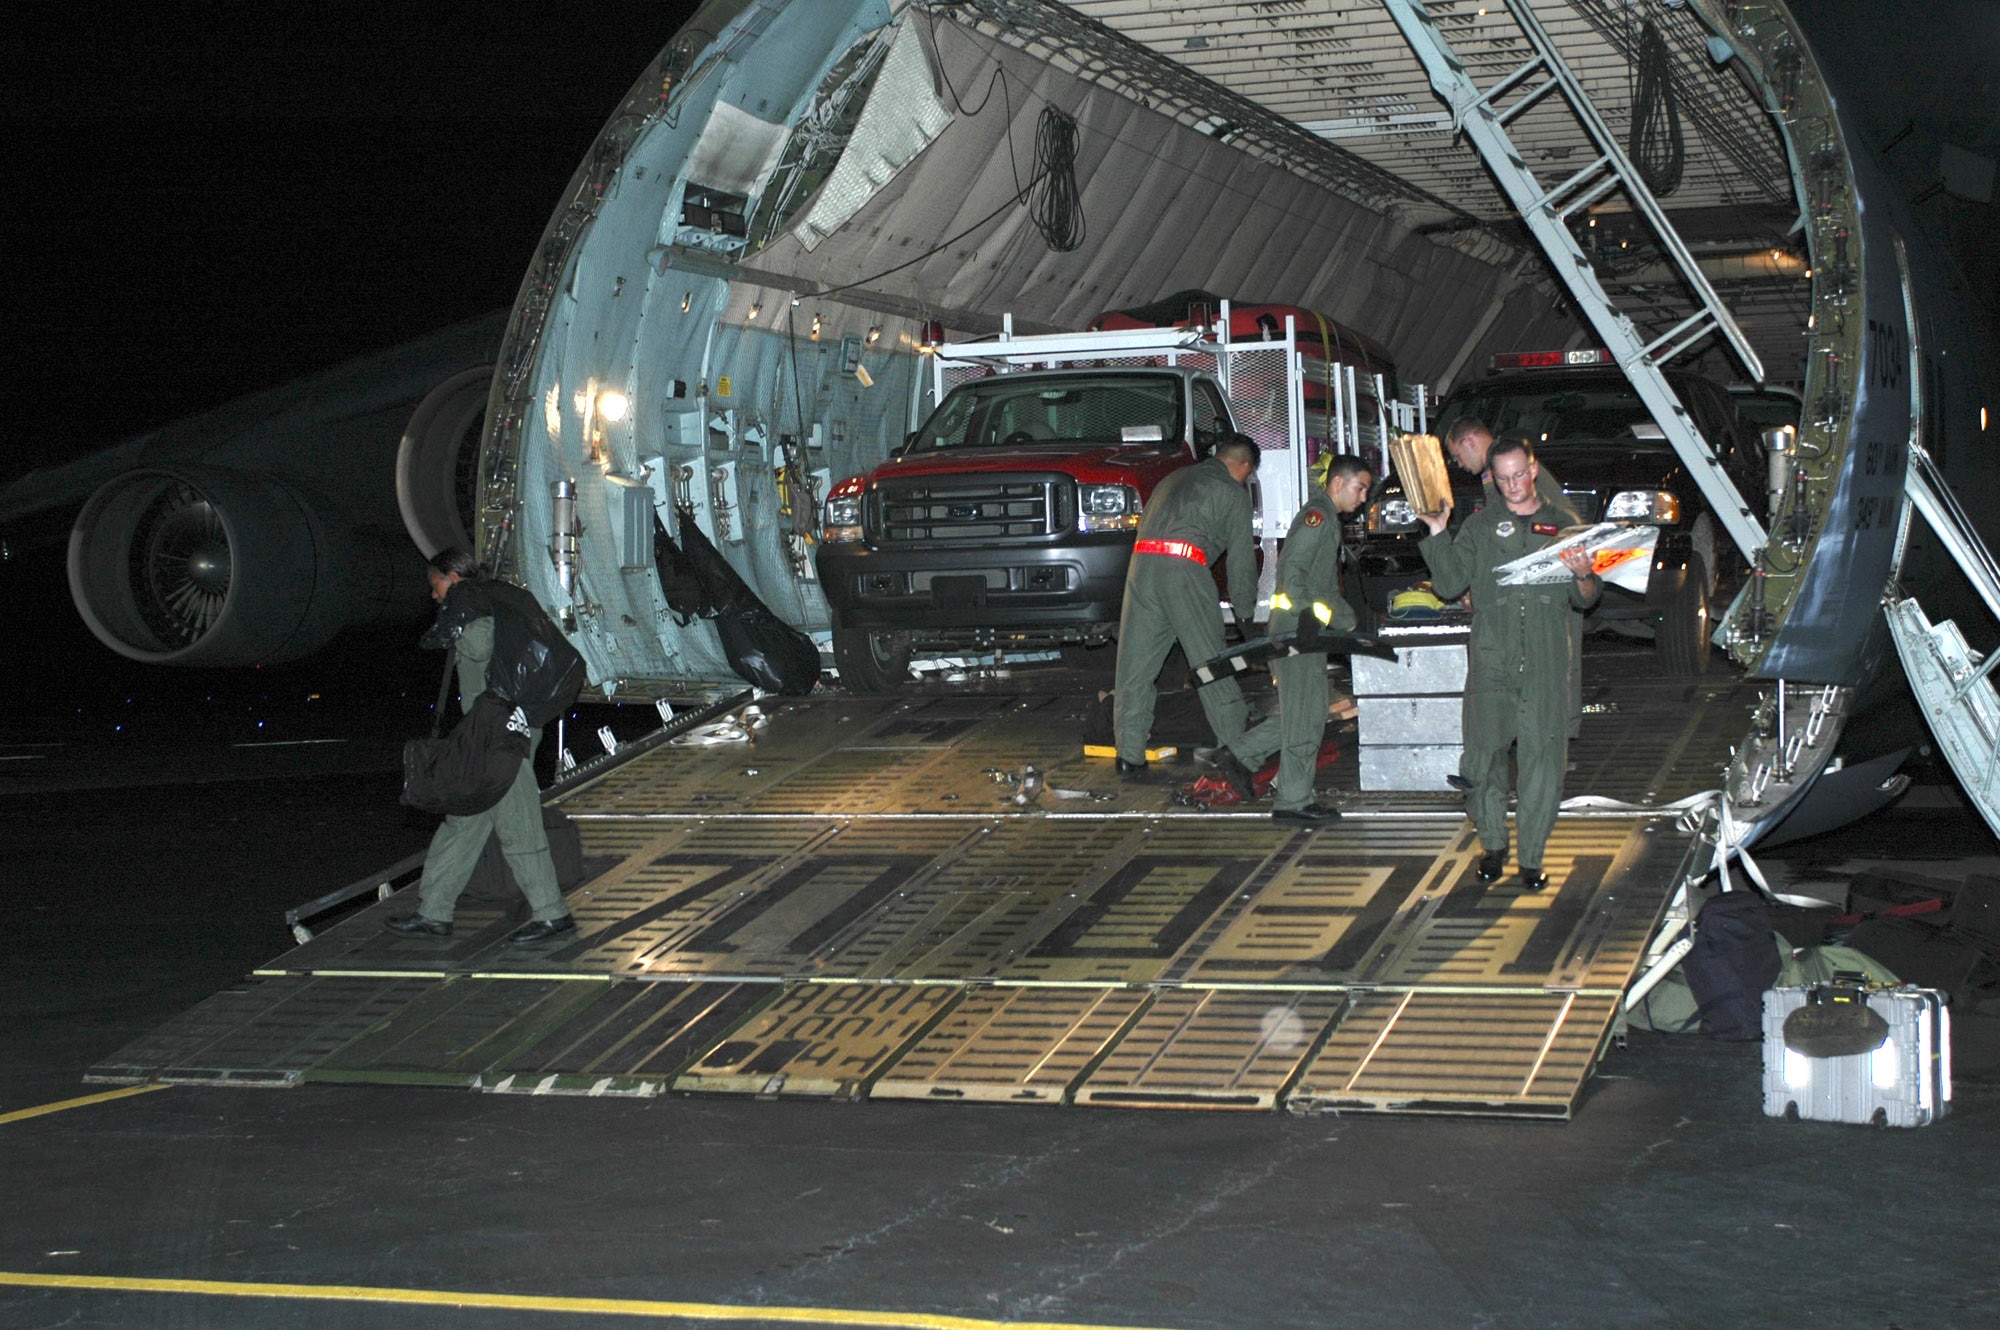 LAFAYETTE, La. -- Airmen with the 21st Airlift Squadron from Travis Air Force Base, Calif., prepare to unload emergency rescue equipment here from a C-5 Galaxy on Aug. 30.  The equipment will be used for Hurricane Katrina relief operations in Mississippi and Louisiana.  (U.S. Air Force photo by Staff Sgt. Candy Knight)